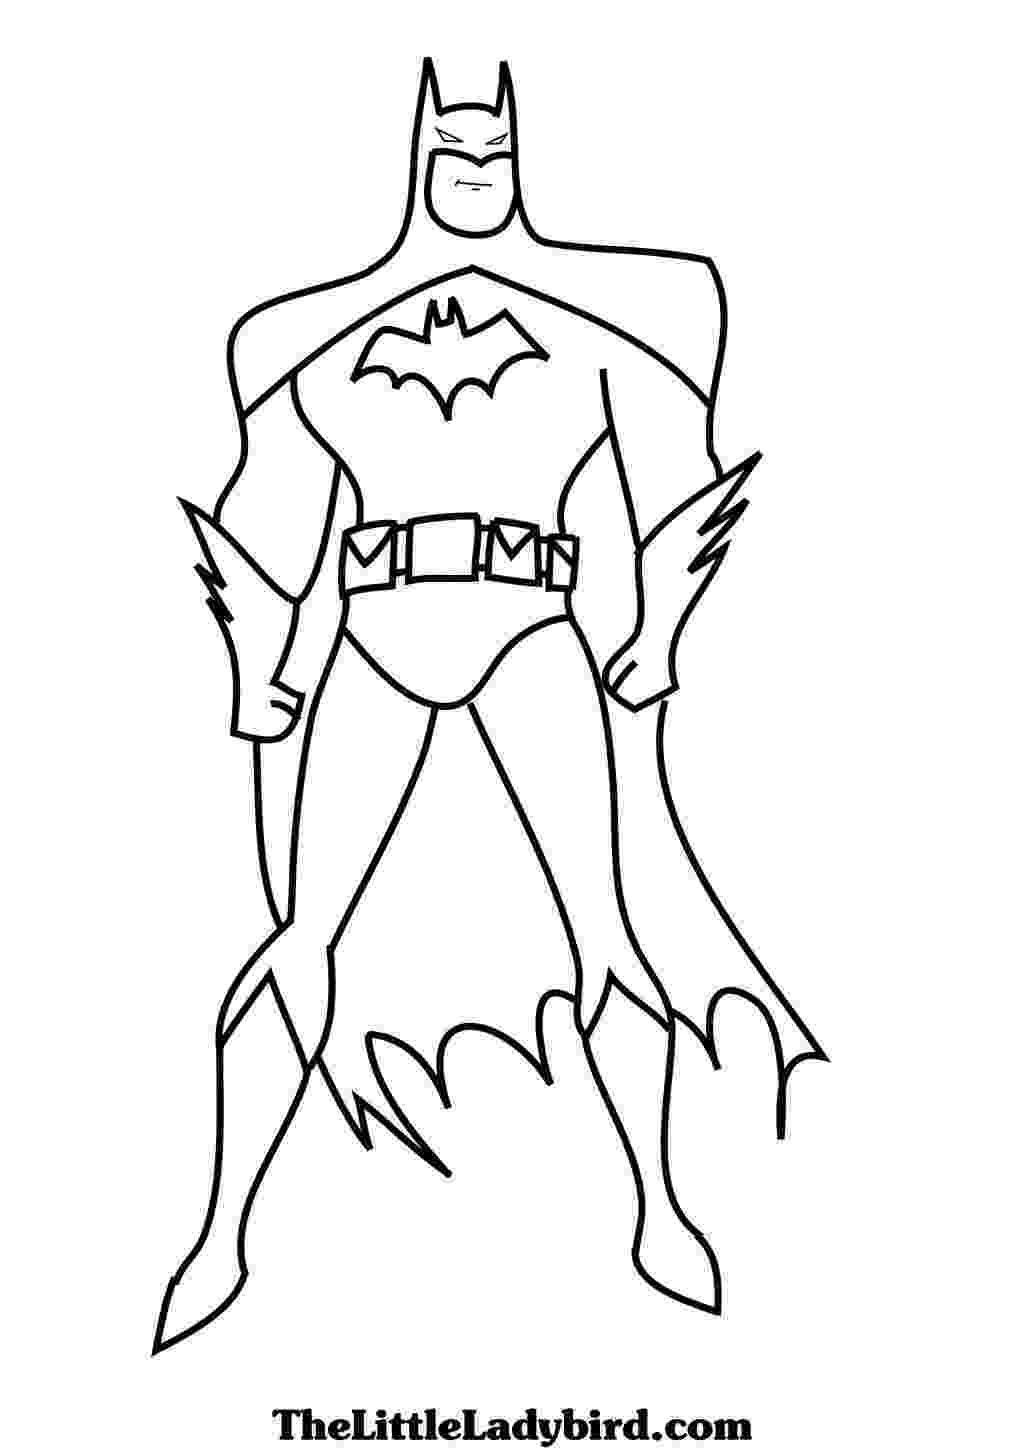 colouring pages batman spiderman spider man coloring sheets for kids print and color our batman colouring spiderman pages 